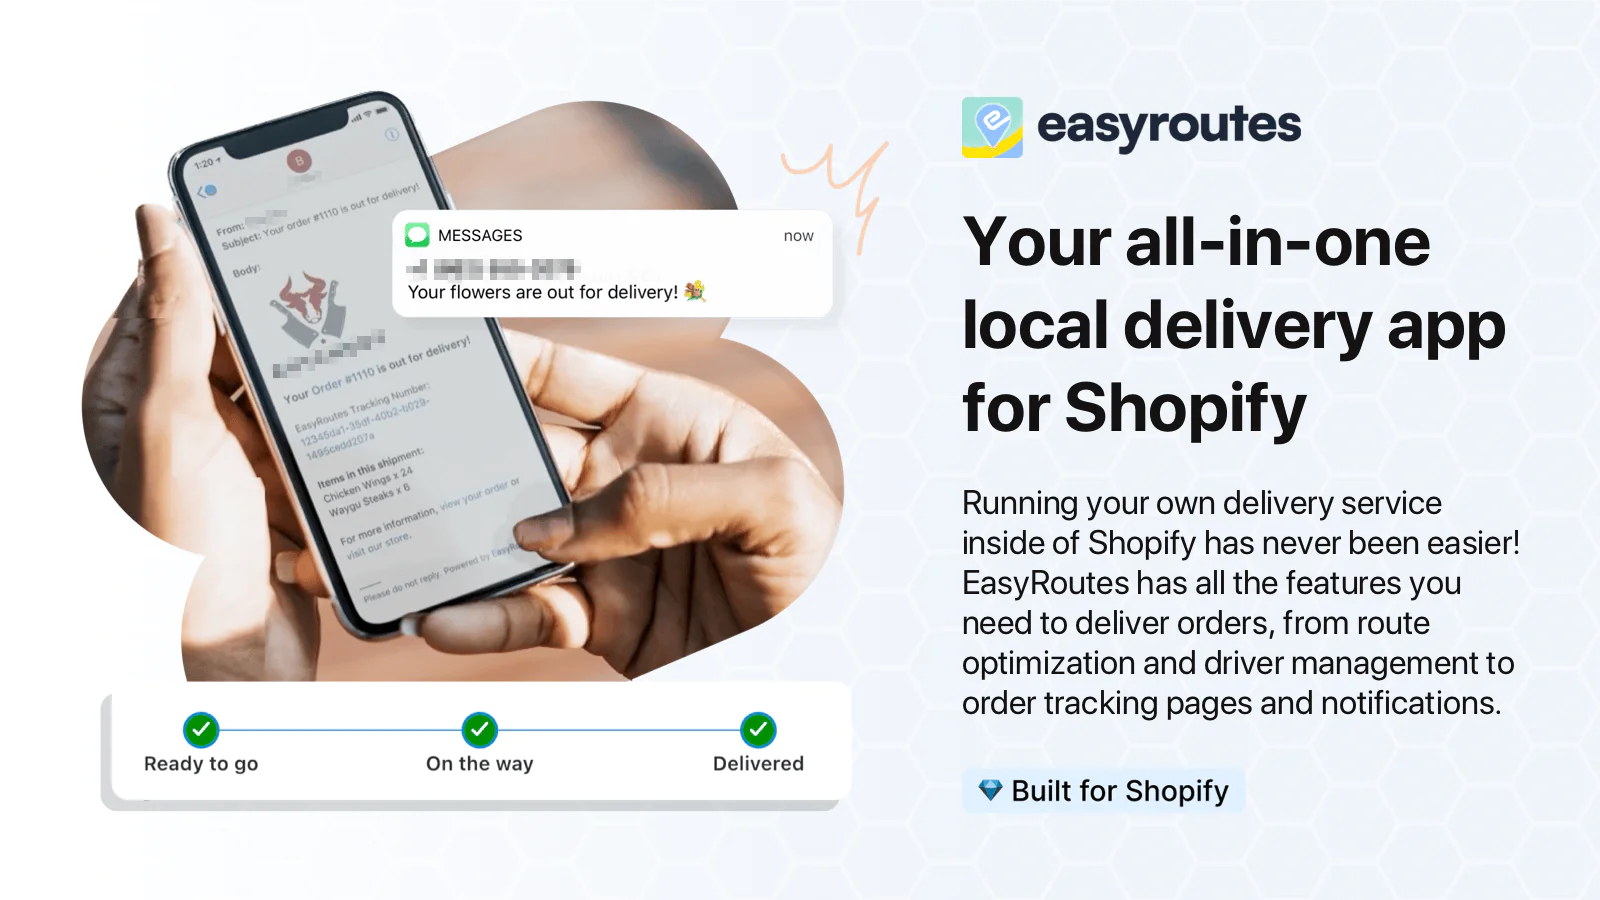 EasyRoutes Your all-in-one local delivery app for Shopify